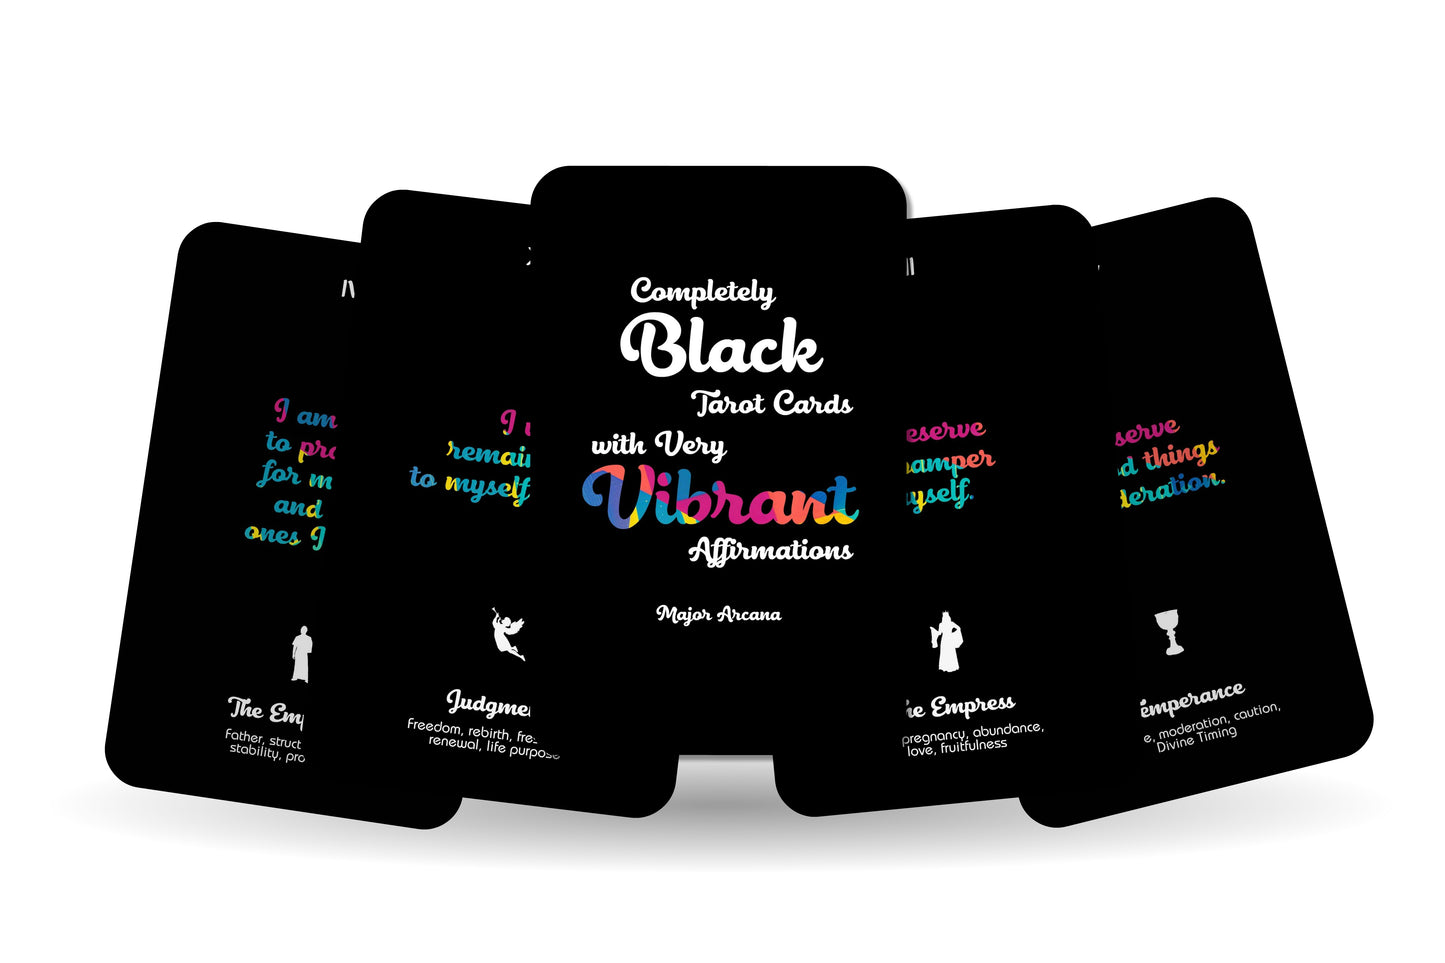 Completely Black Tarot Cards with Very Vibrant Affirmations - Major Arcana